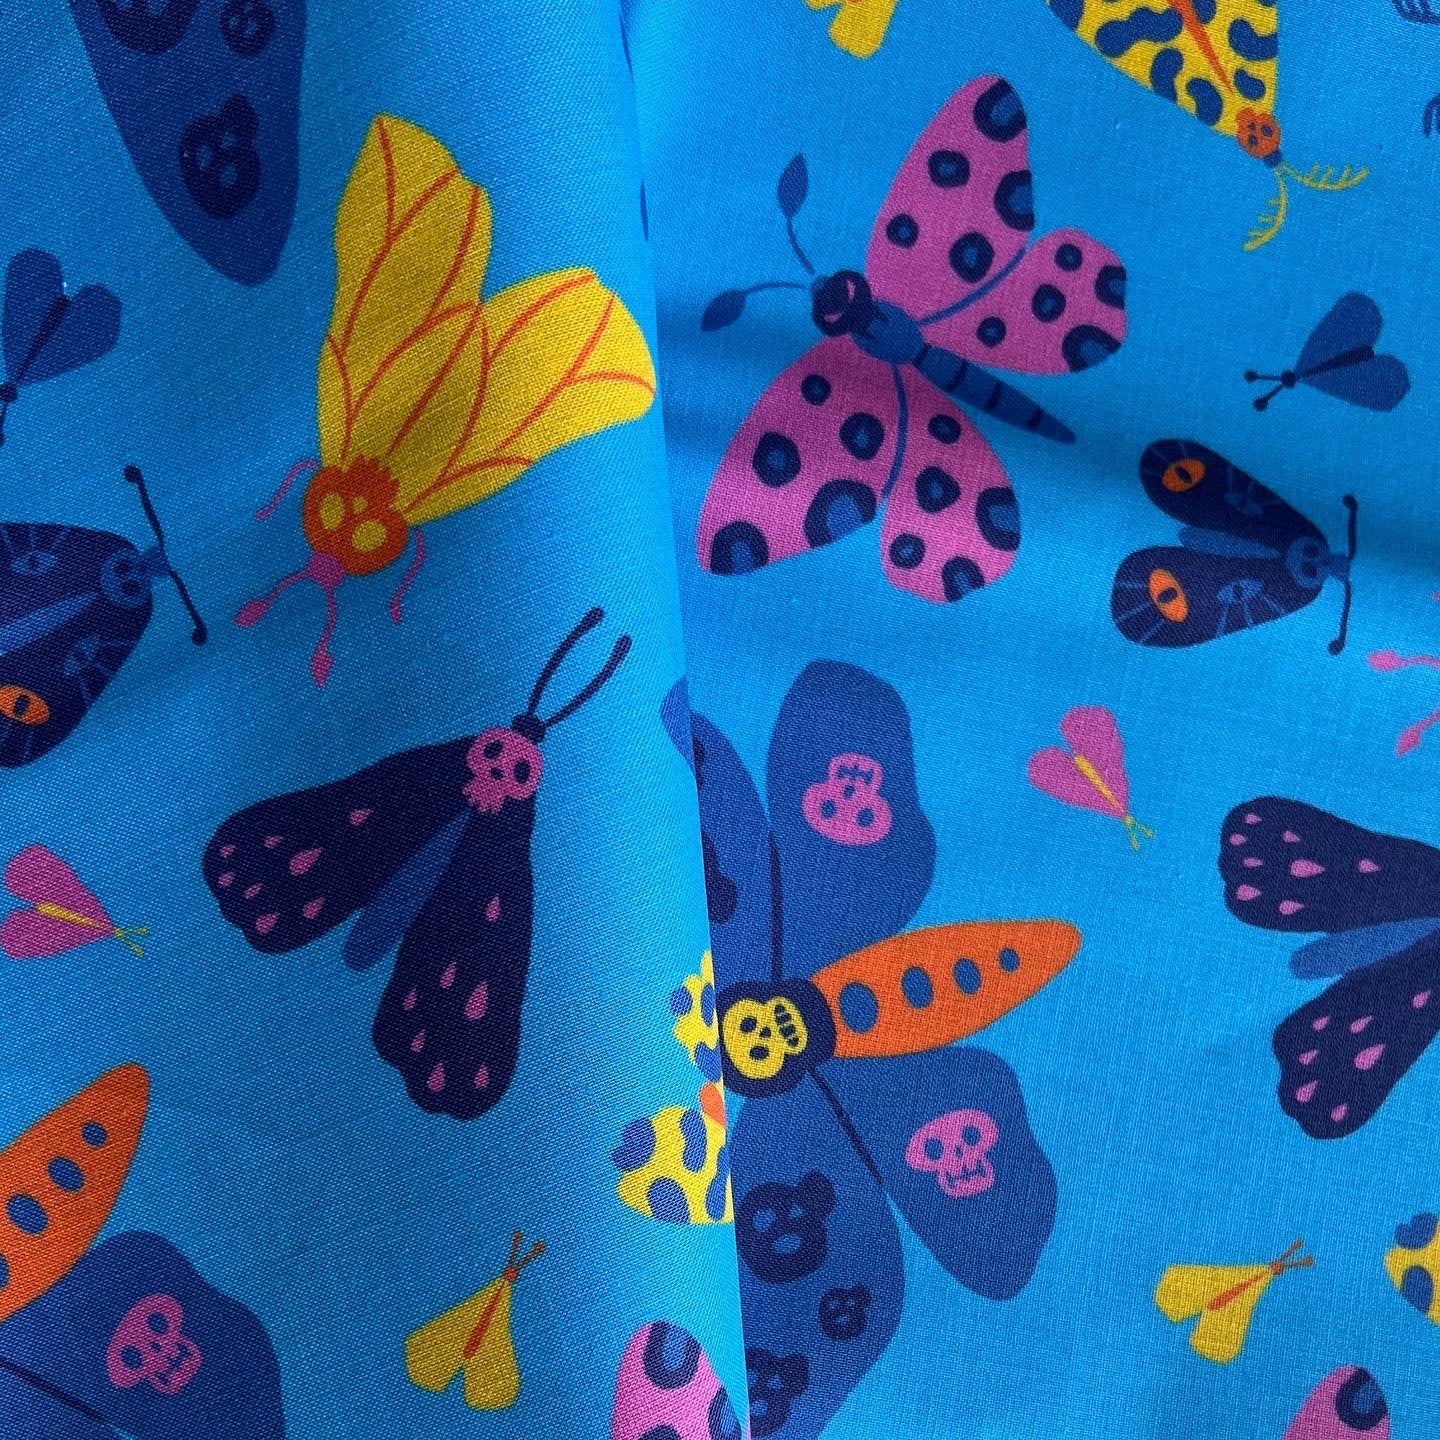 Fabric “The silence of the moths” (blue background)